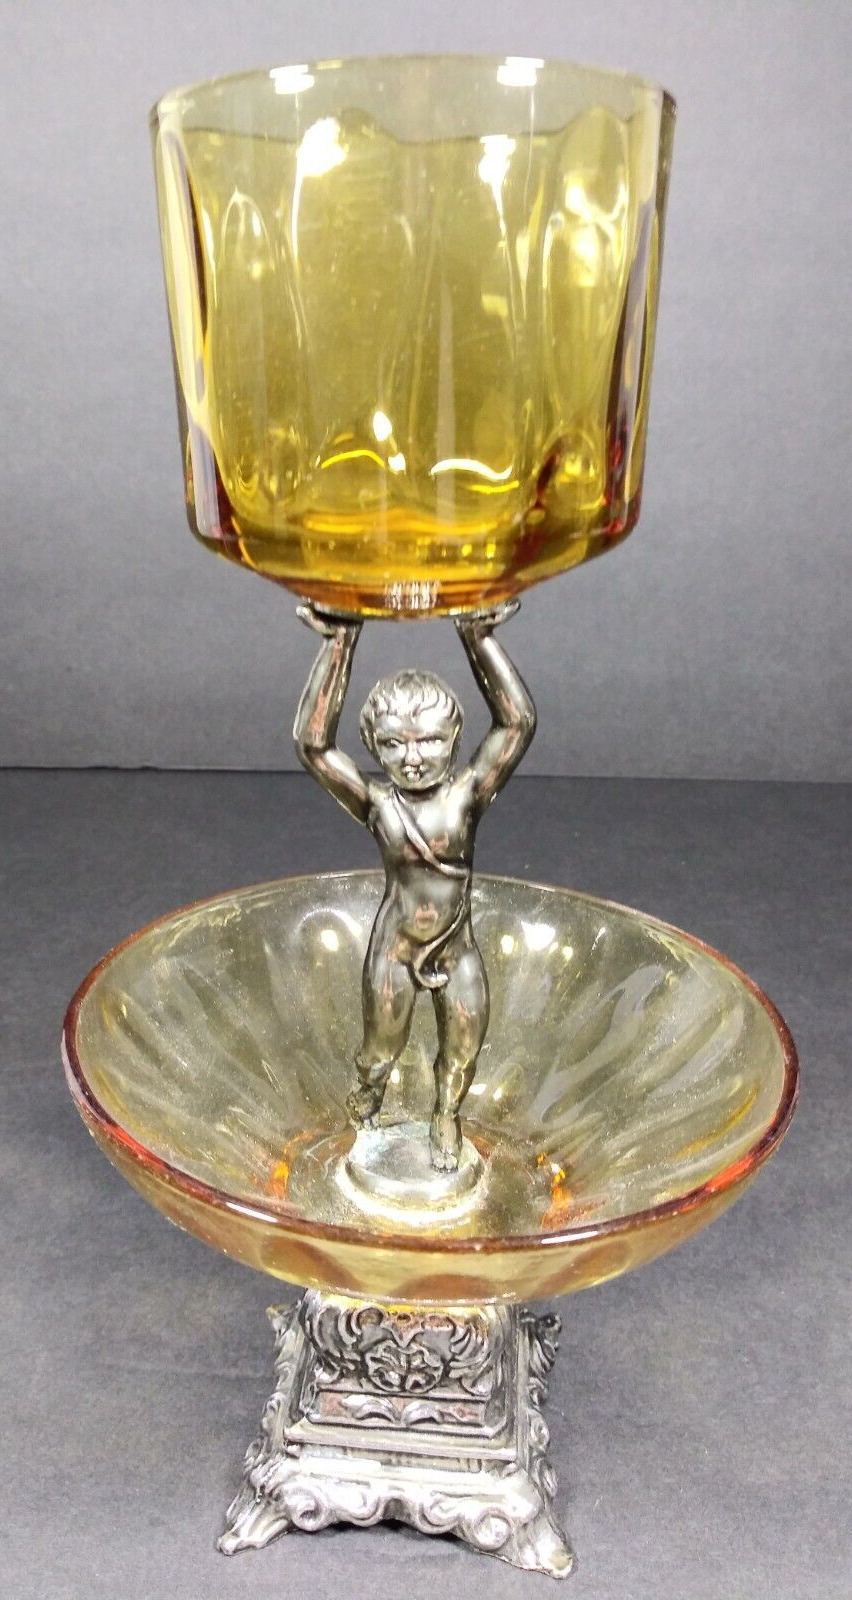 Vintage Compote Cherub Holding Amber Glass Dish Silver Base 8.5” Tall